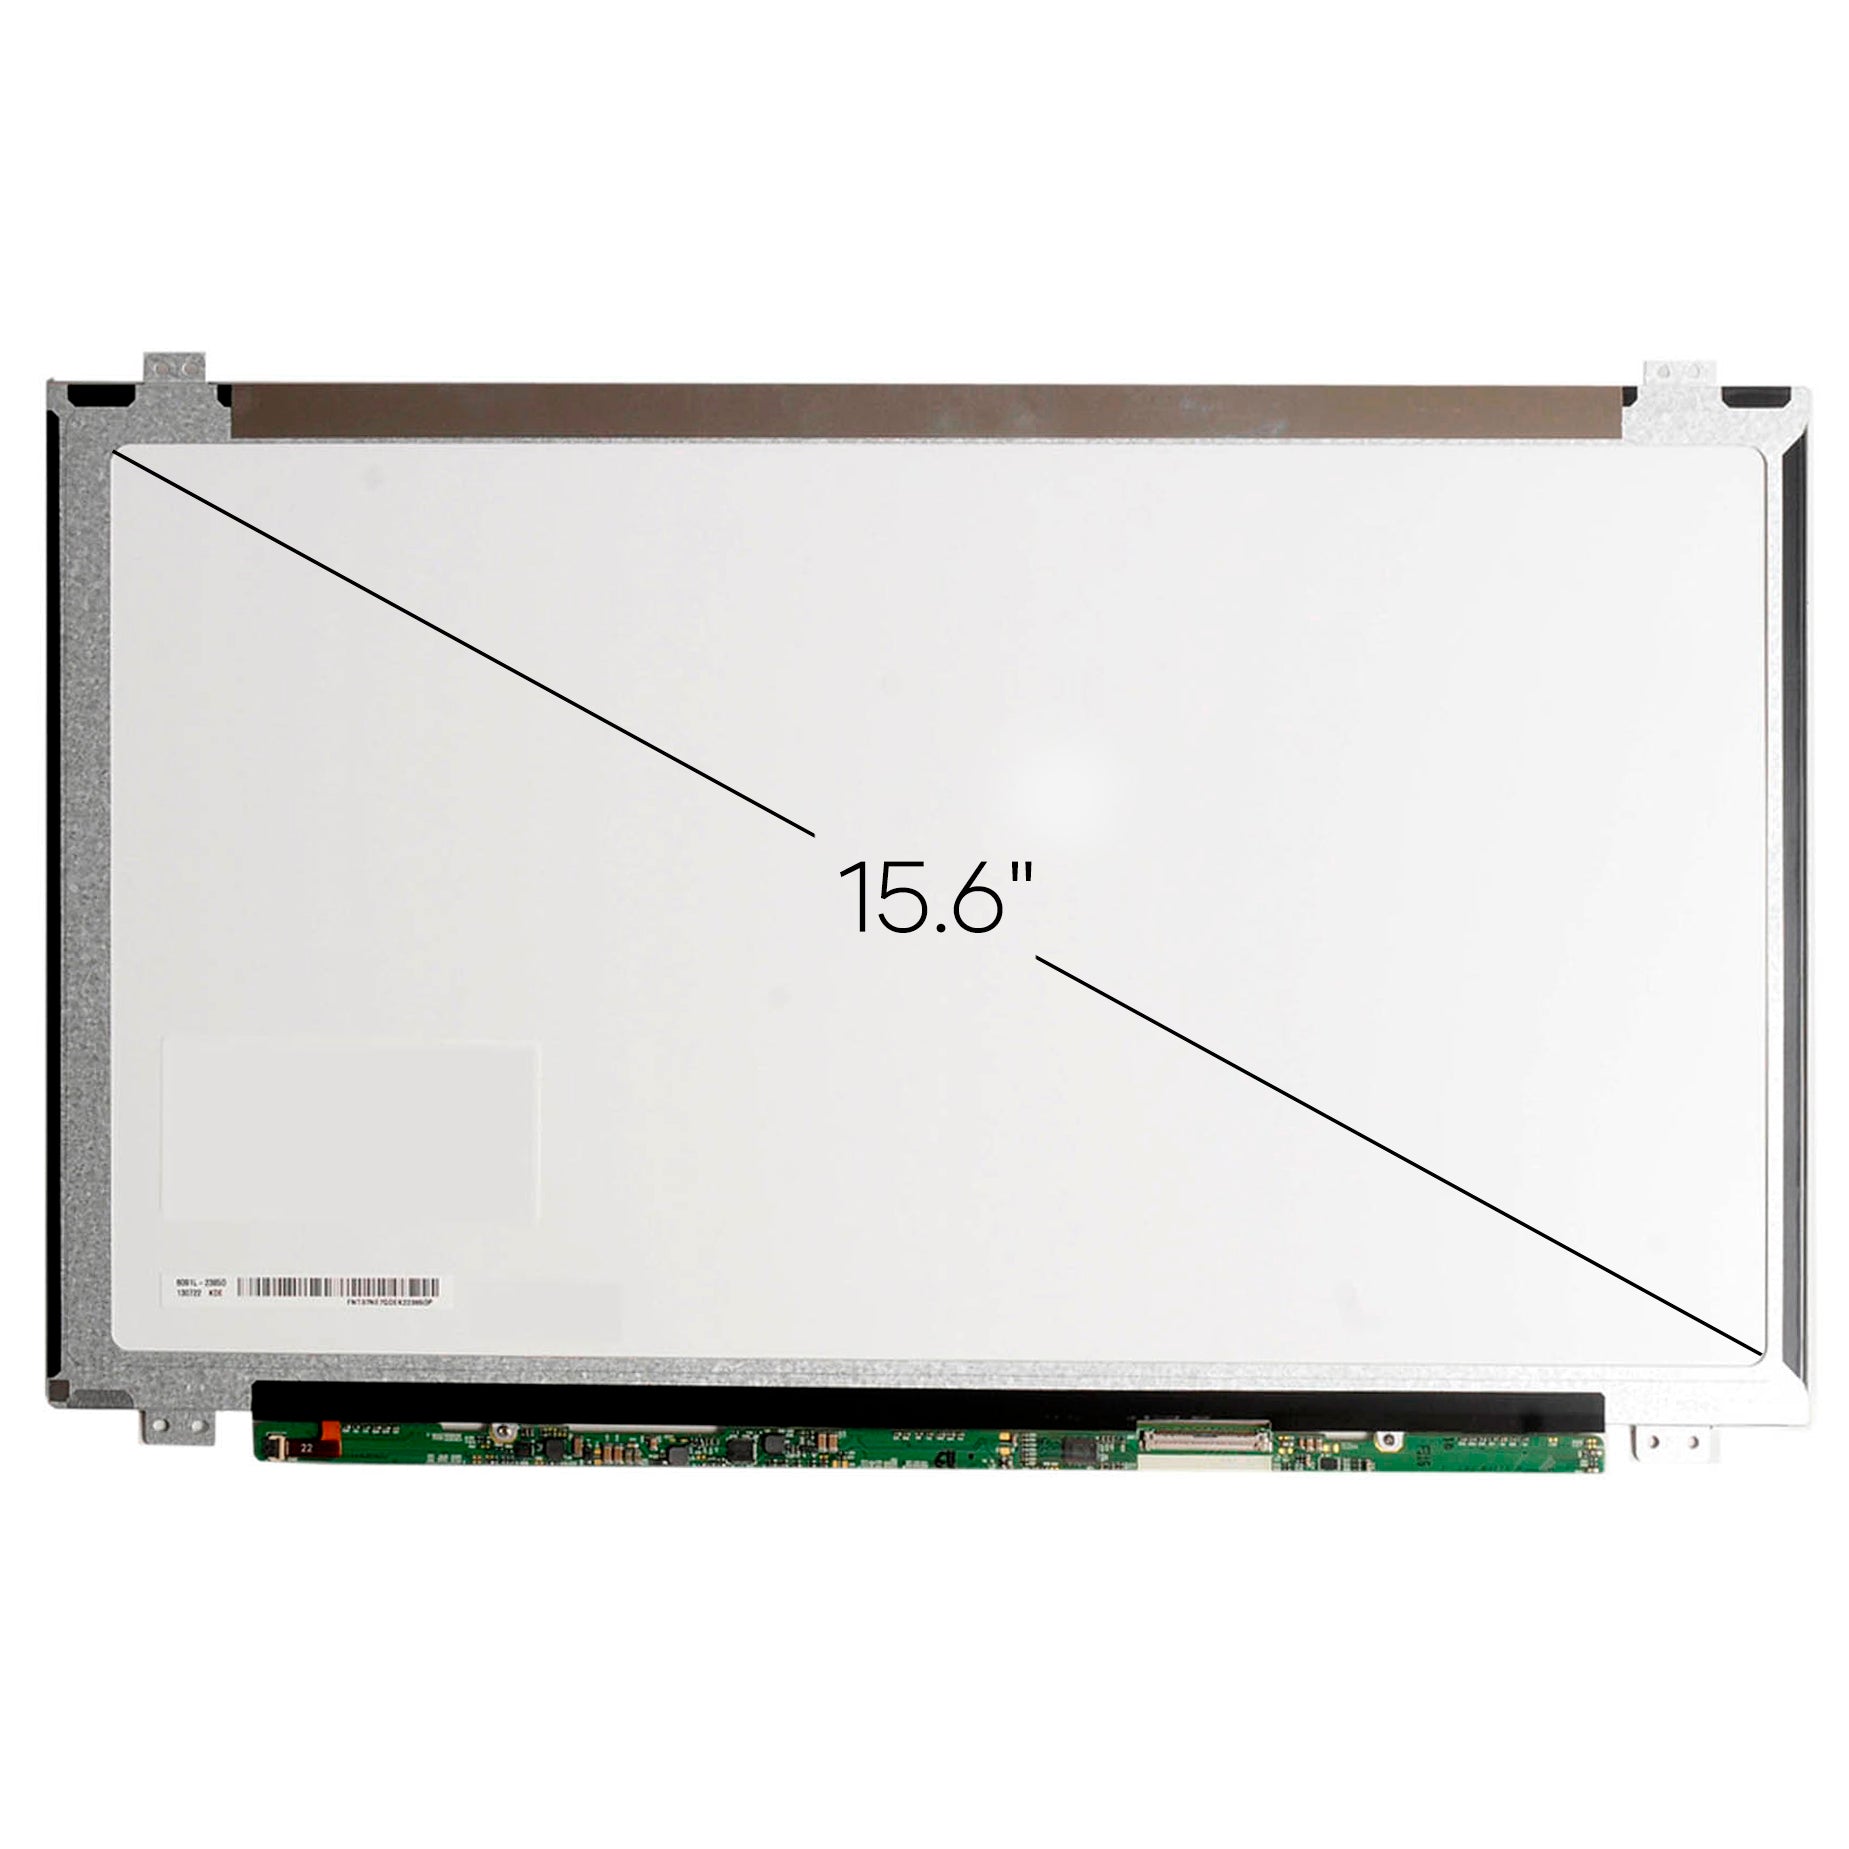 Replacement Screen For LTN156AT20-H01 HD 1366x768 Glossy LCD LED Display